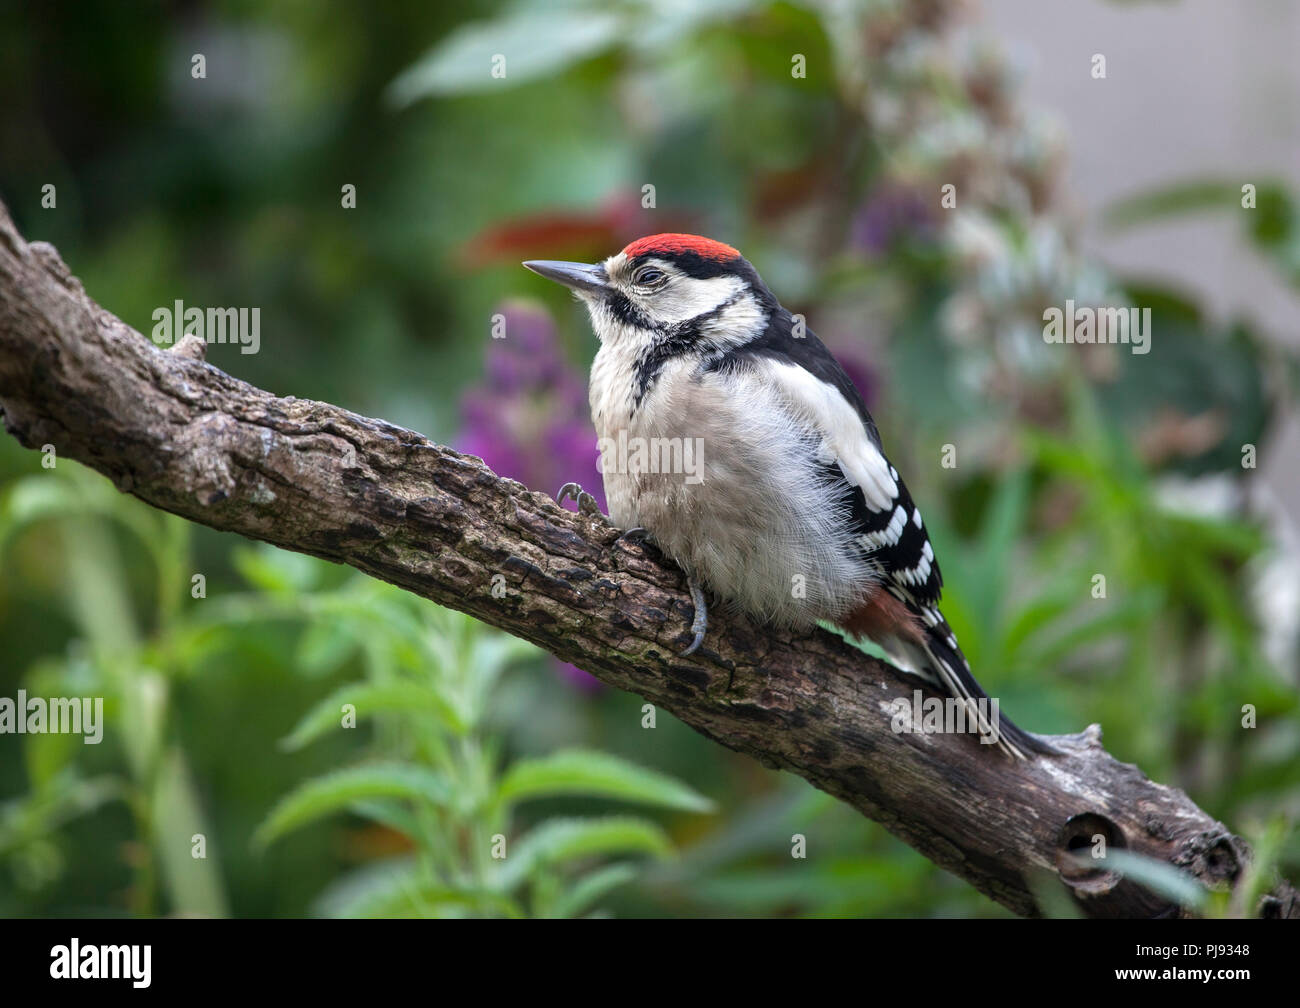 Sleepy Newly Fledged Great Spotted Woodpecker (Dendrocopus major) in a Garden Environment, UK. Stock Photo